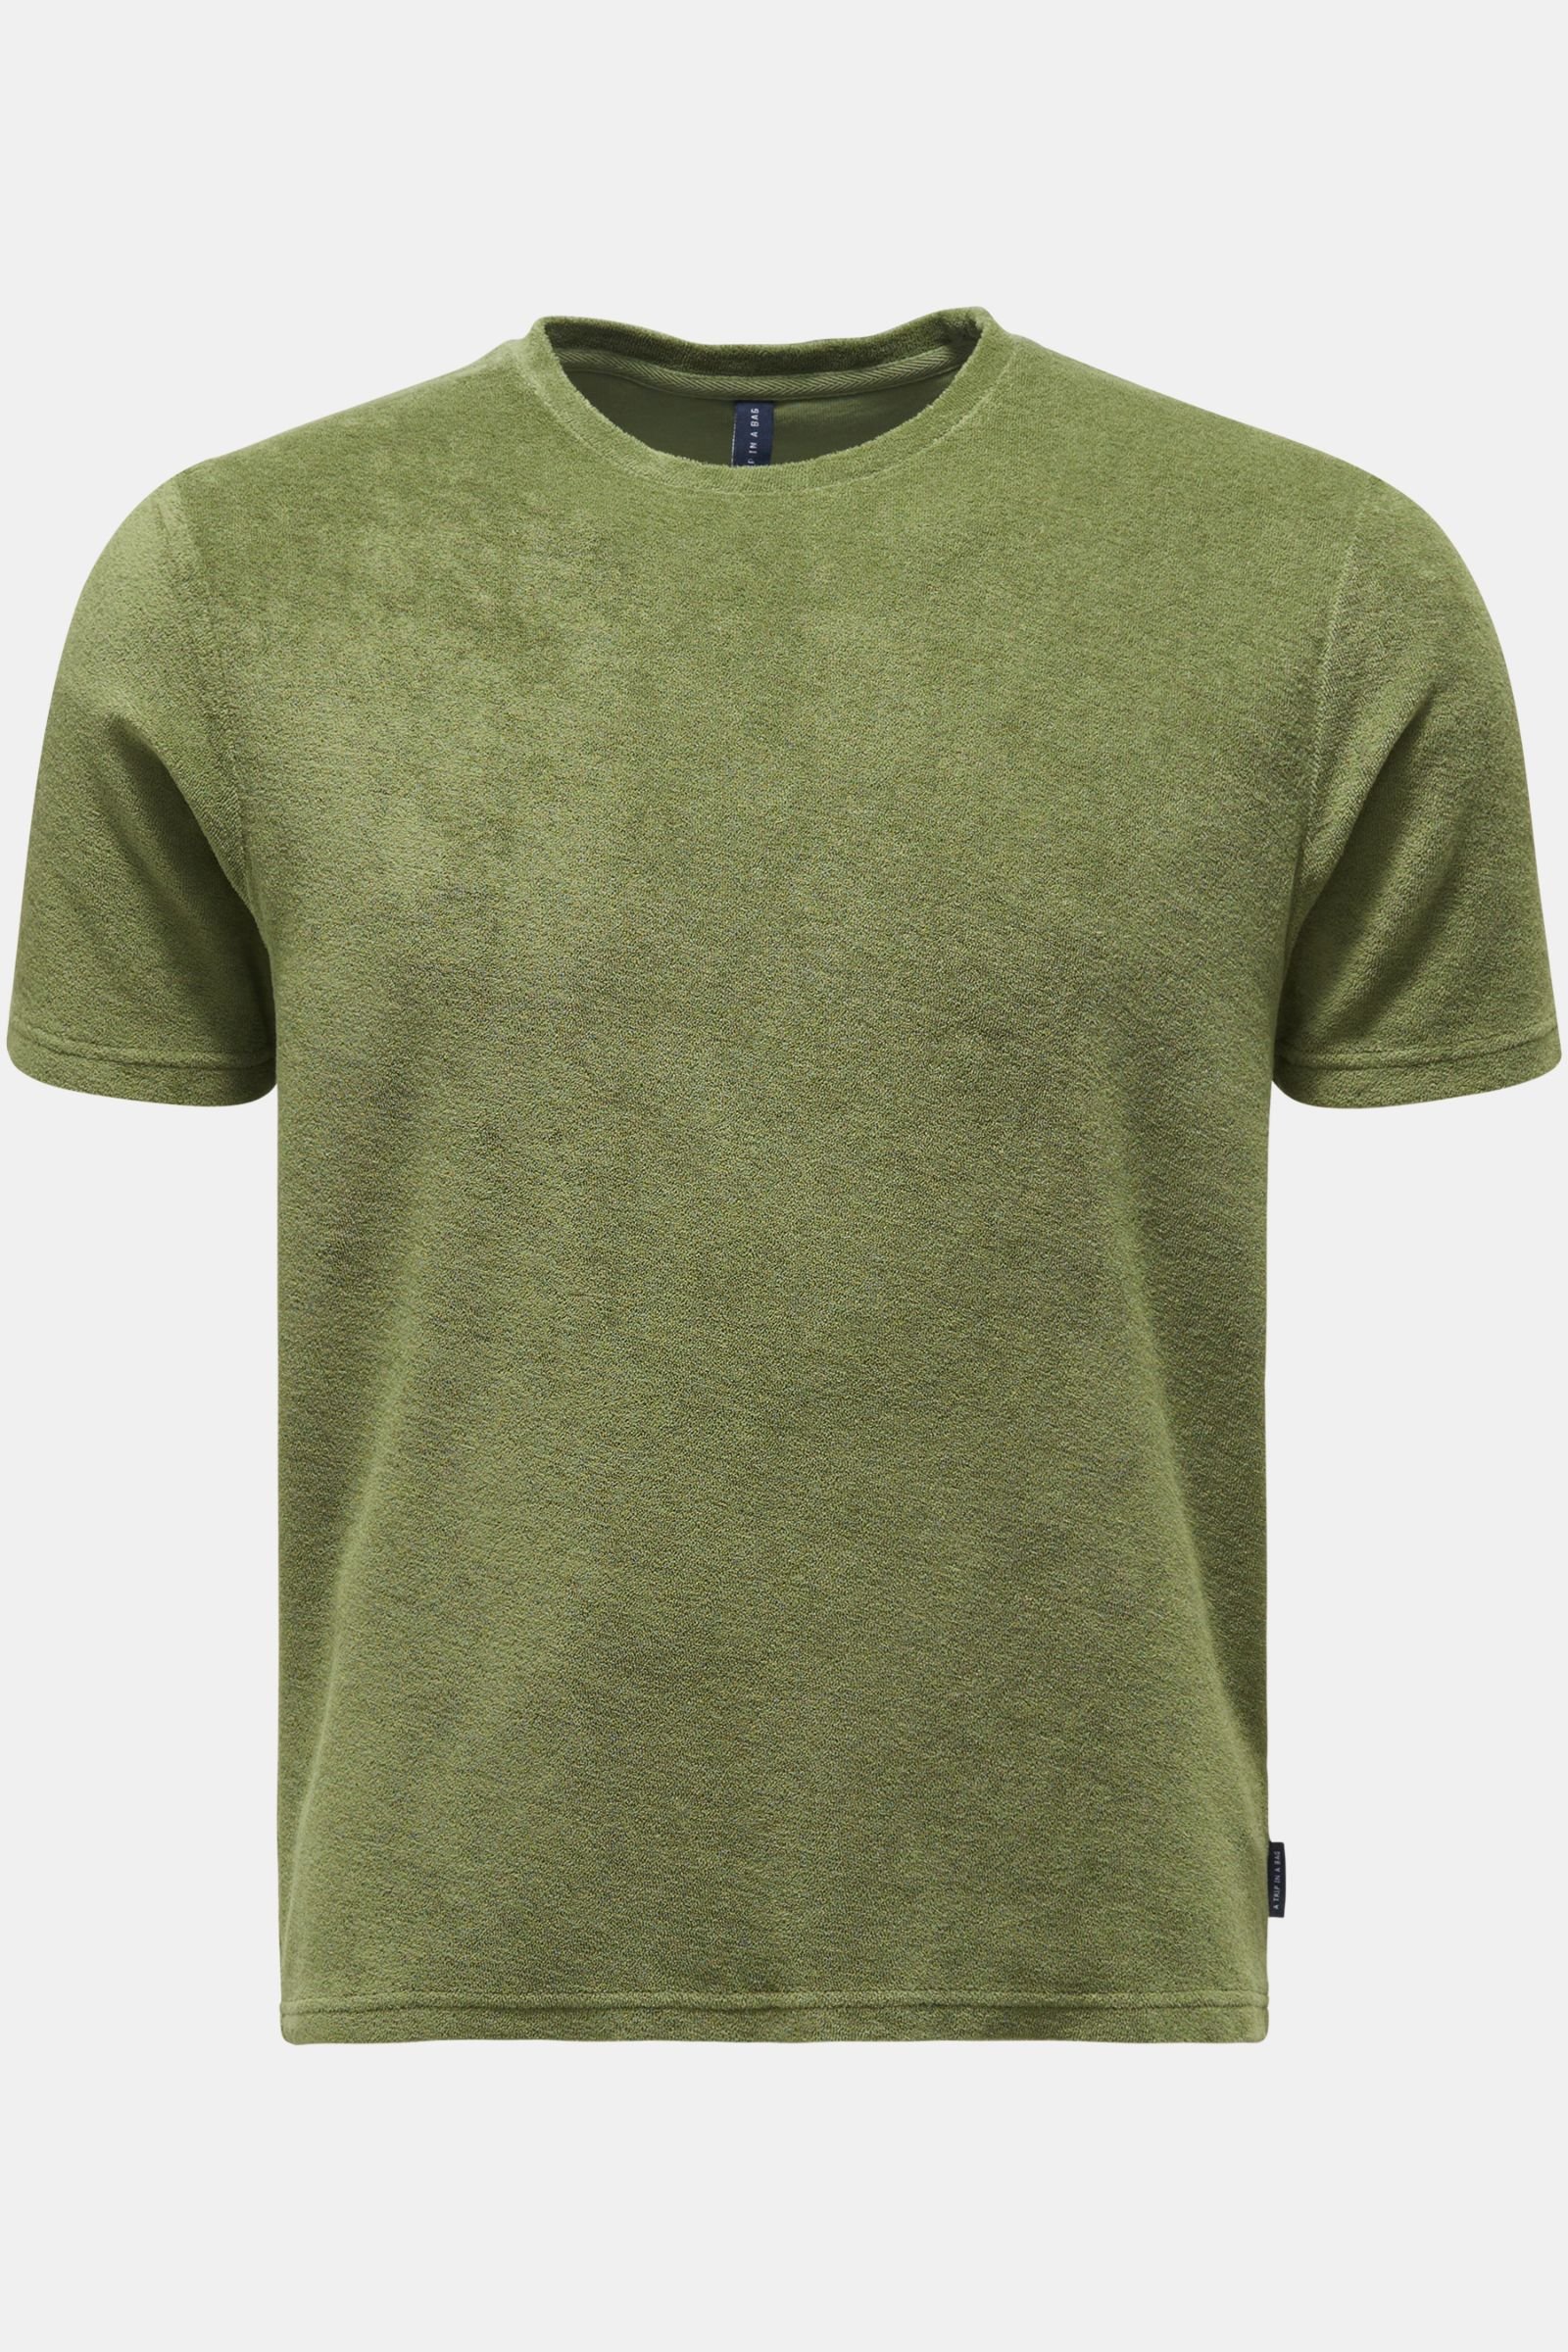 Terry crew neck T-shirt 'Terry Tee' olive